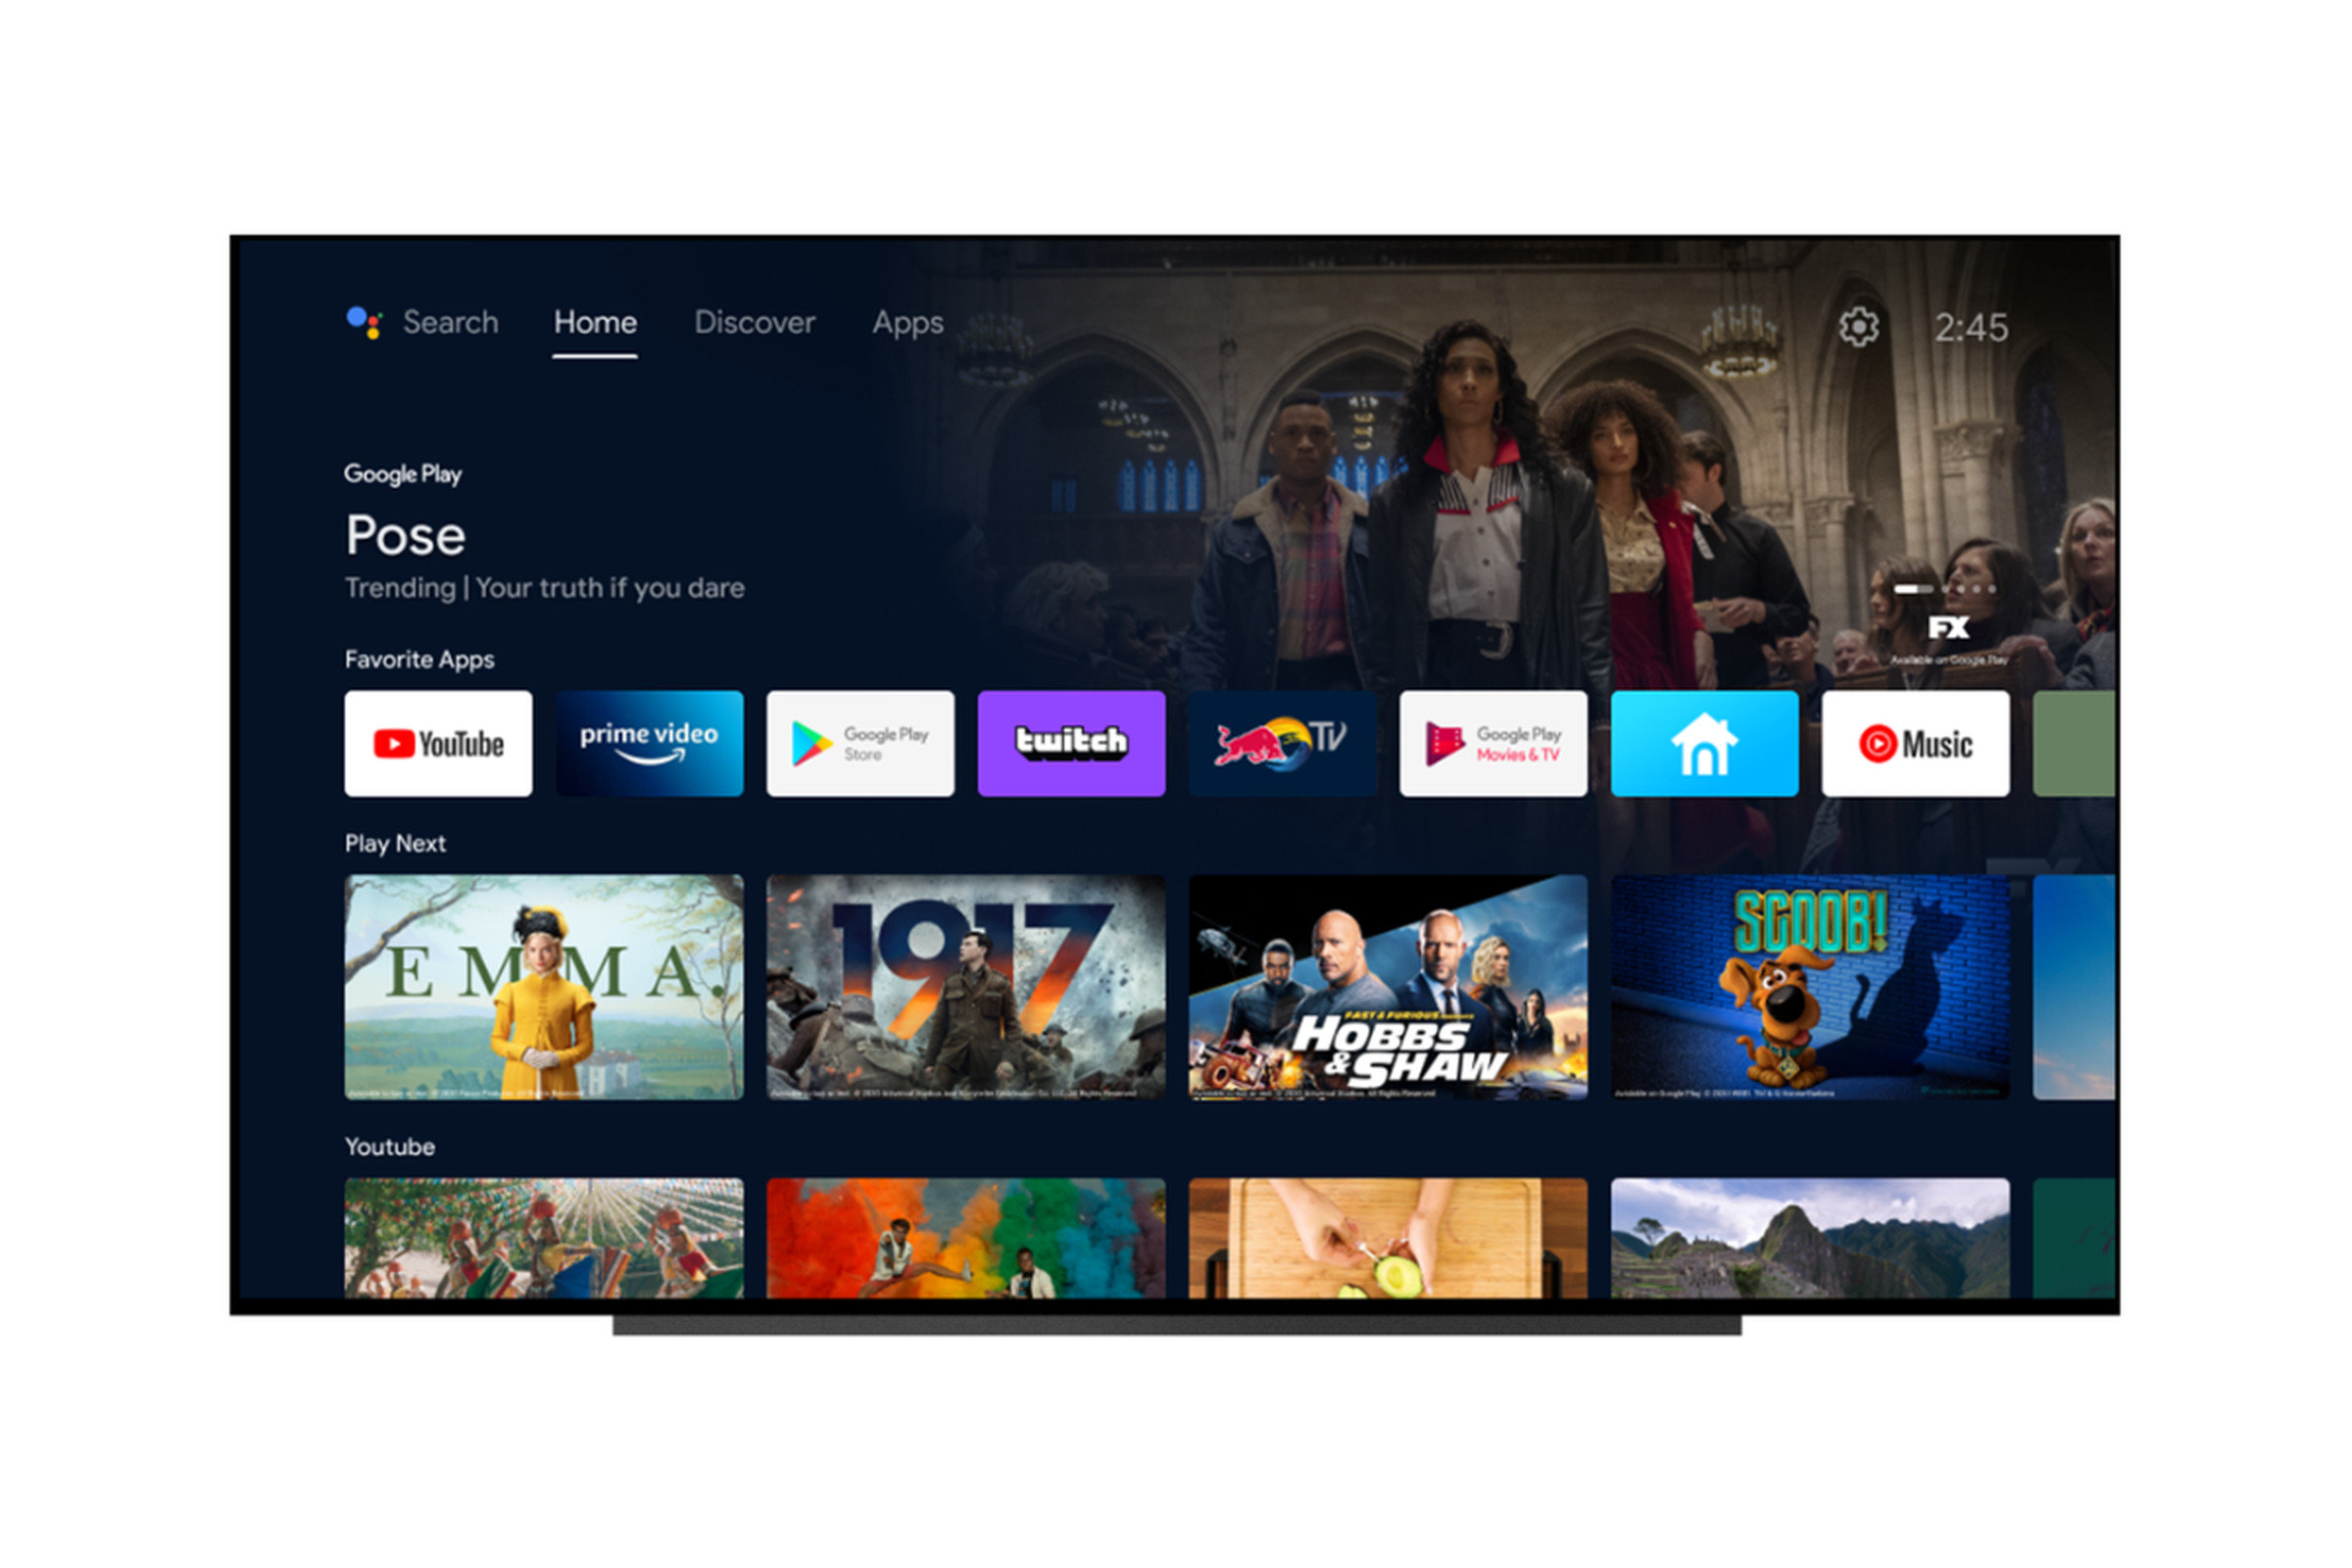 The newly refreshed Android TV home screen